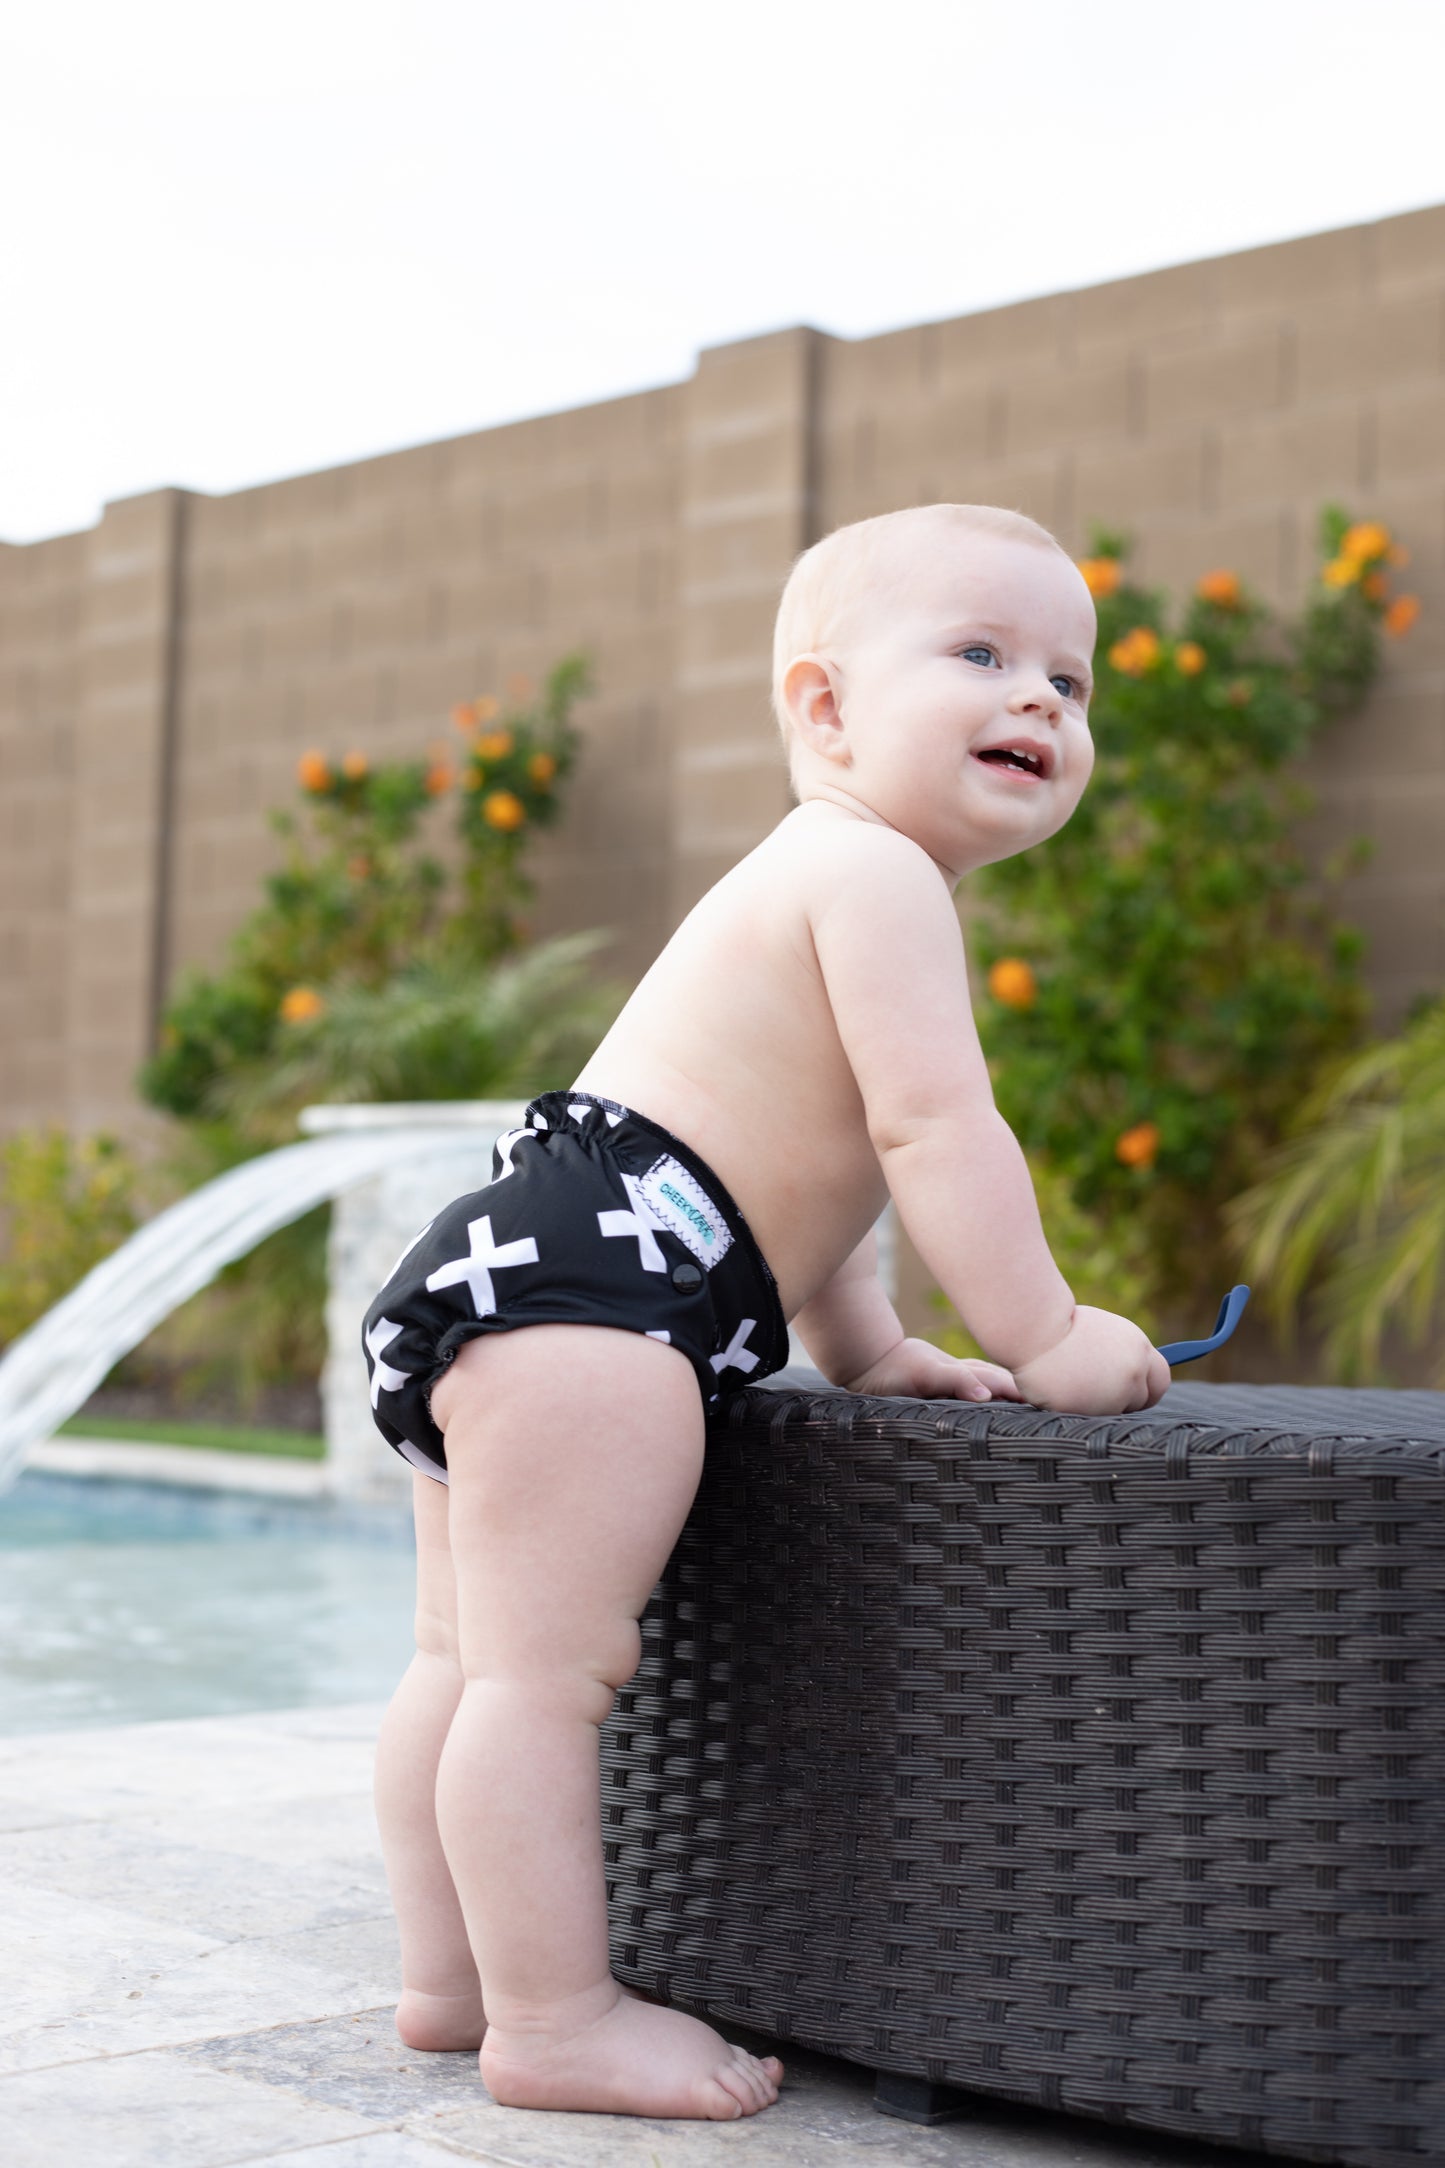 Cheeky Cloth One Size Reusable Swim Diaper "Black with white x"